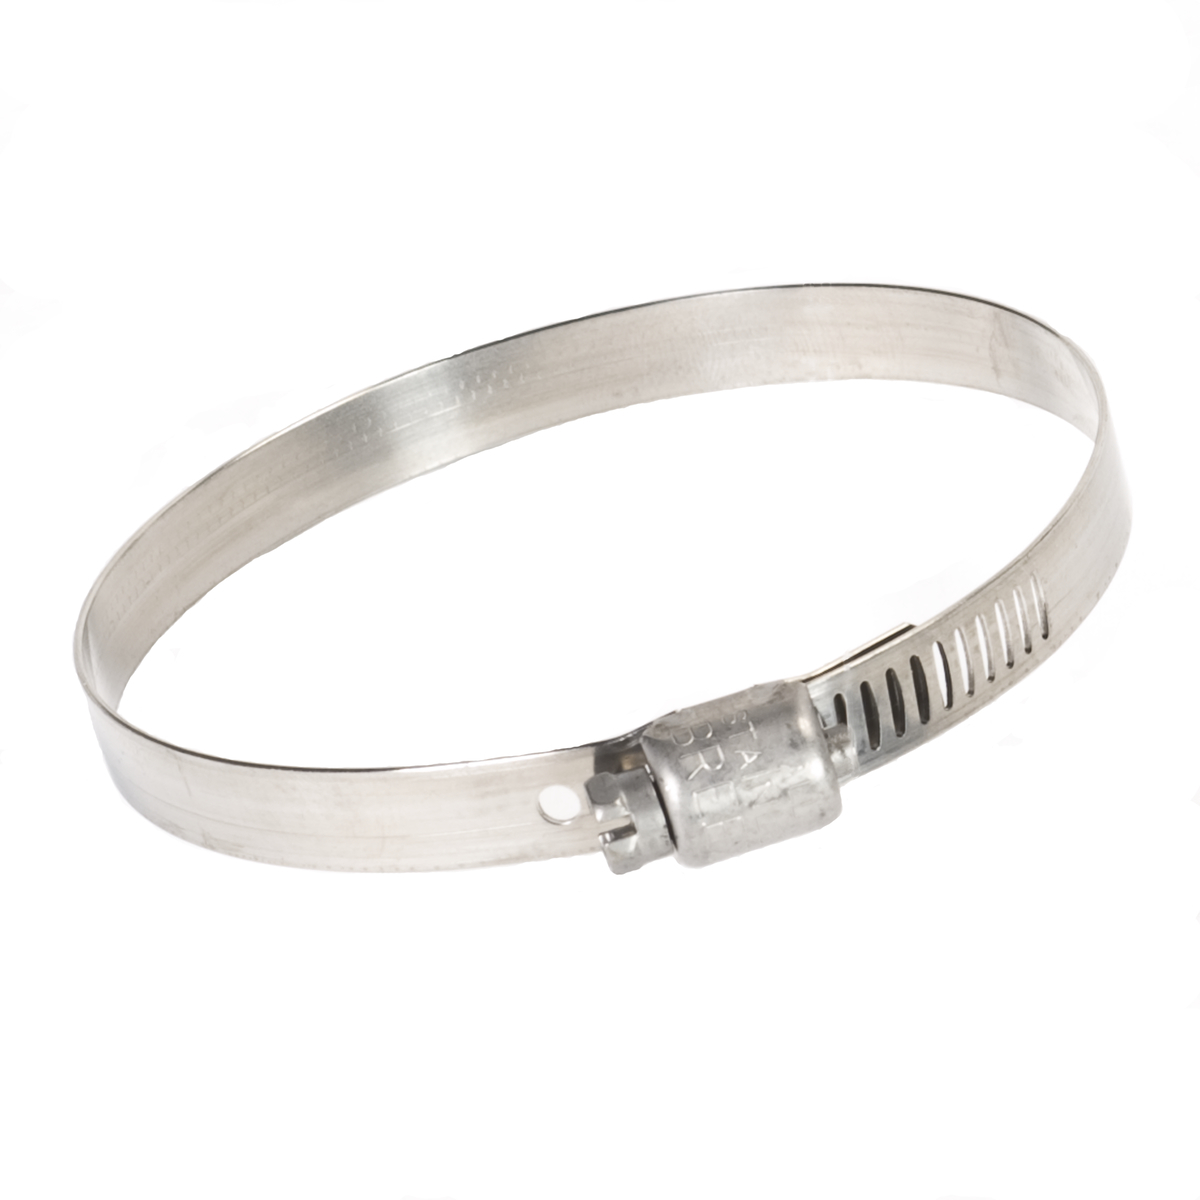 MSA Hose Clamp Ultra-Vue®/Ultra-Twin® (Availability restrictions apply.)